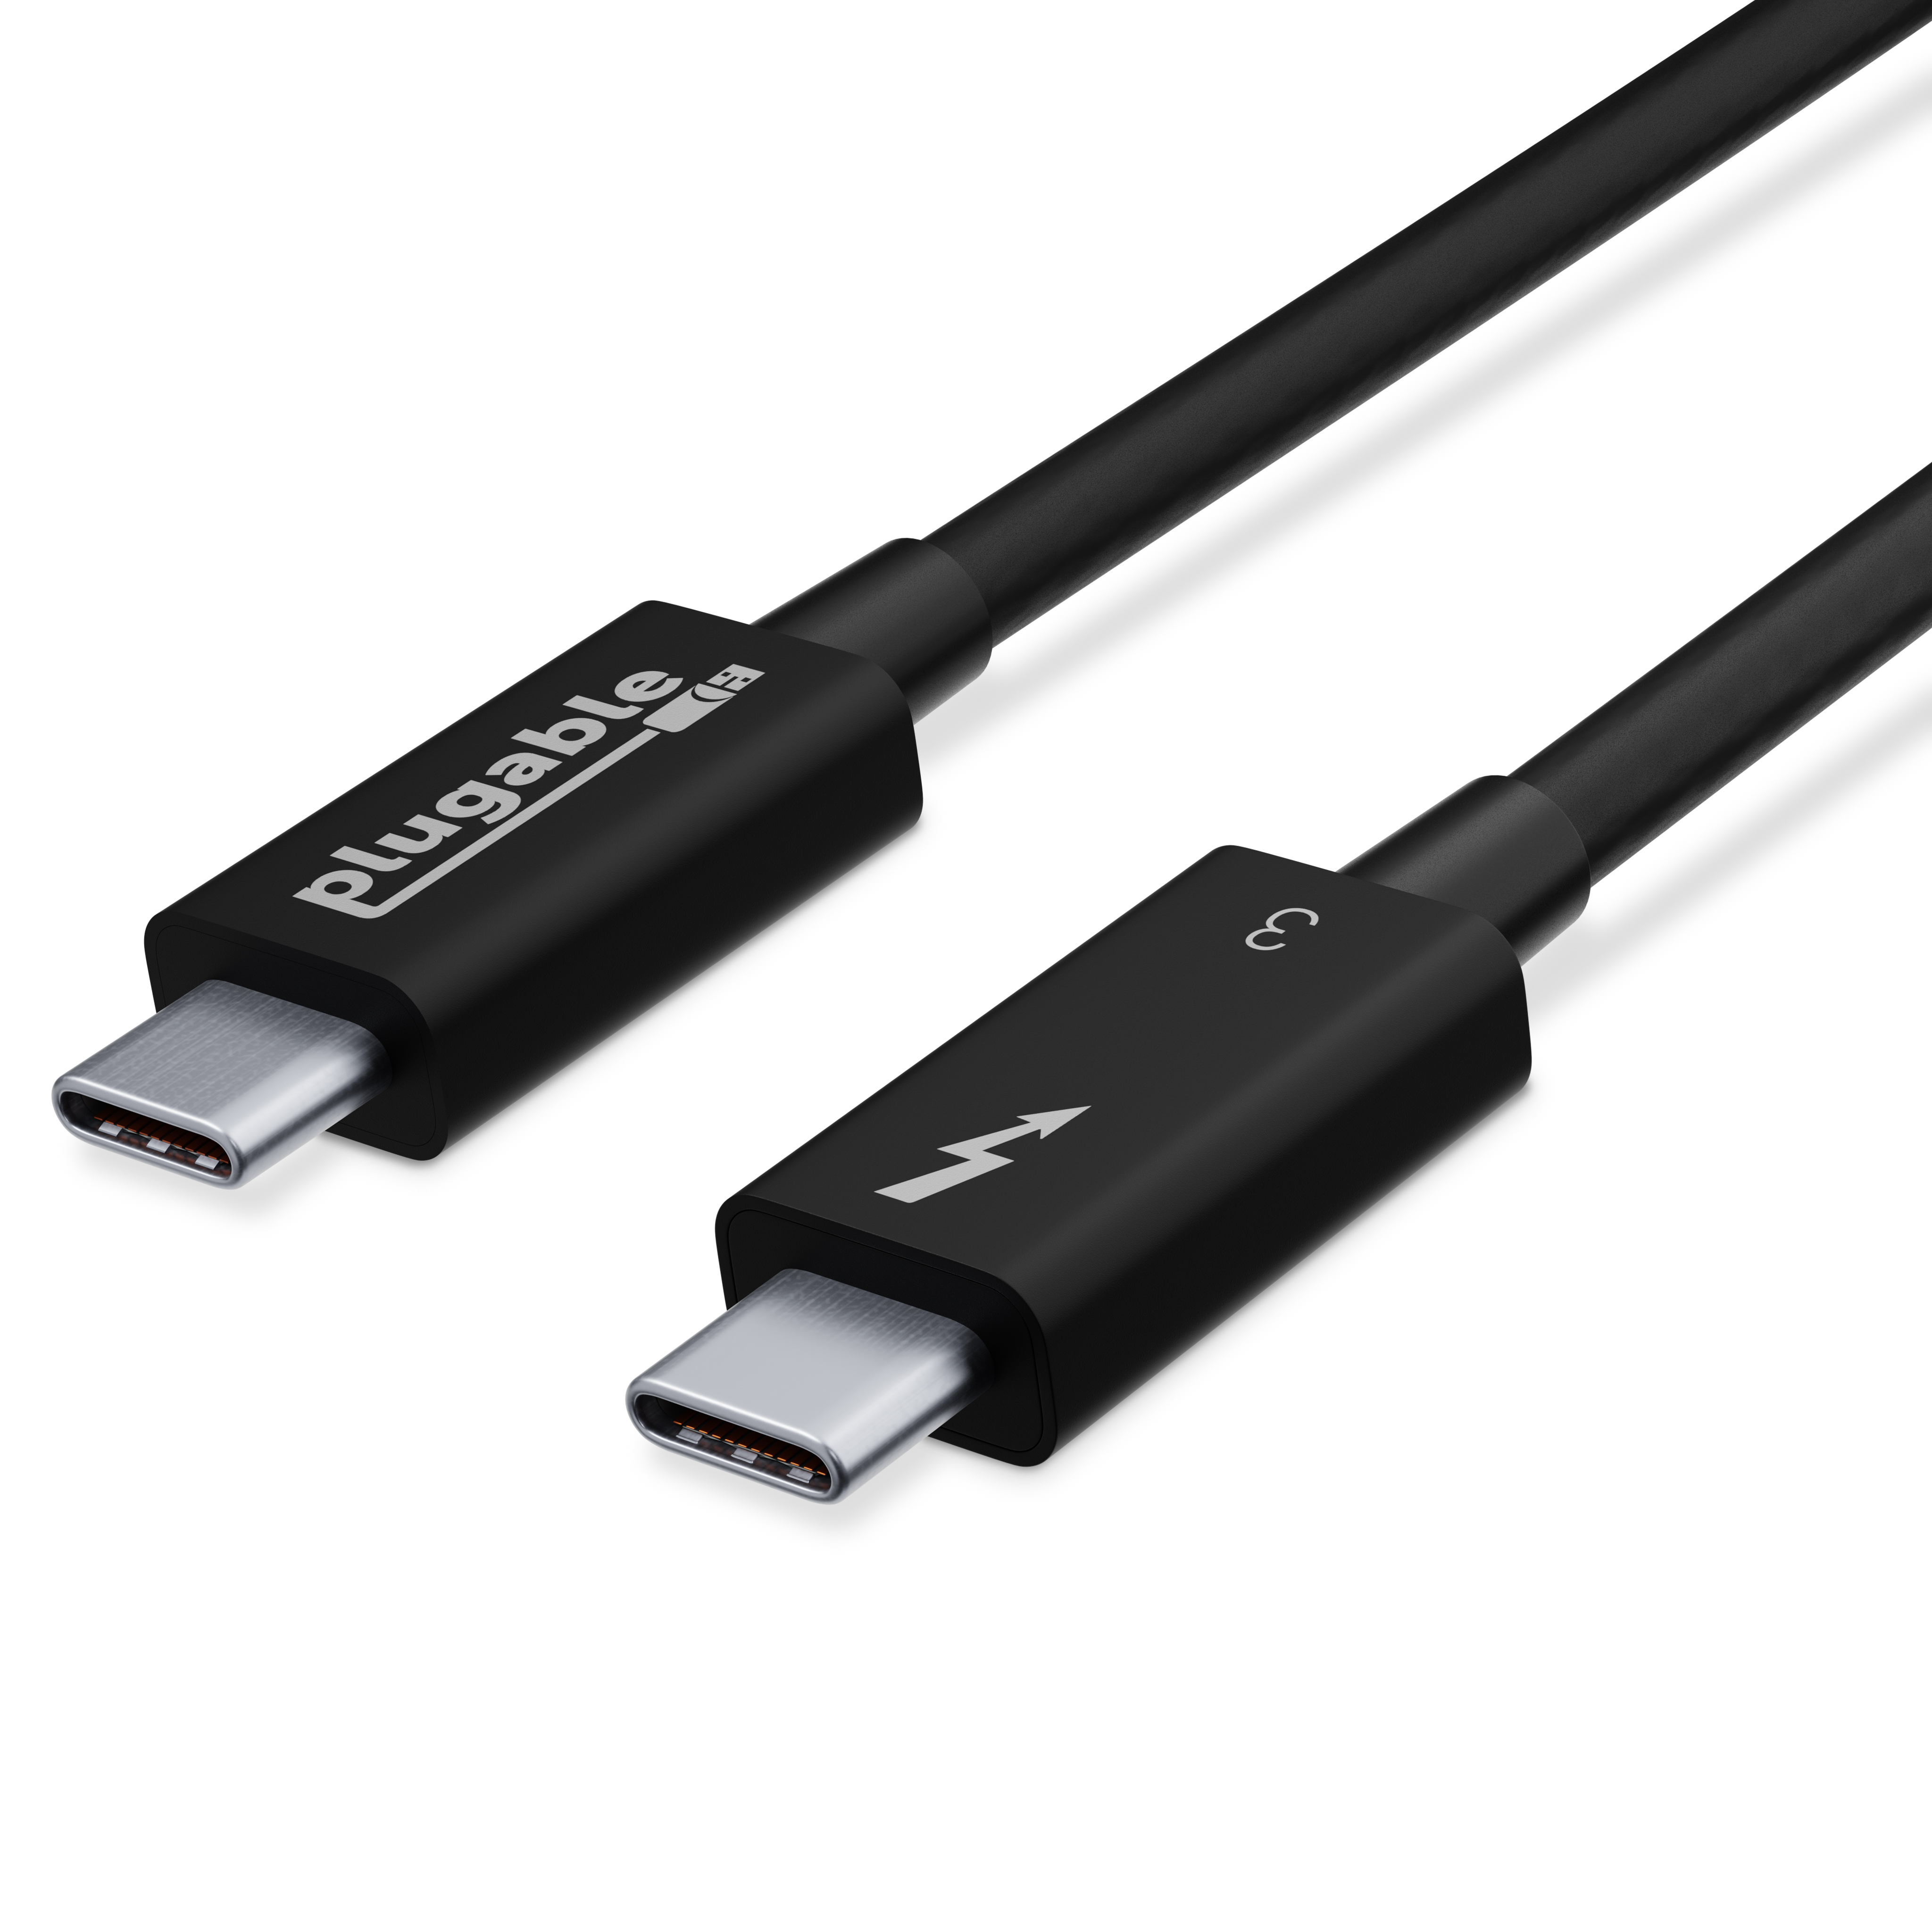 Plugable Thunderbolt 3 Cable 40Gbps Supports 100W (20V, 5A) Charging, 2.6ft / 0.8m USB C Compatible [Thunderbolt 3 Certified] - image 1 of 8